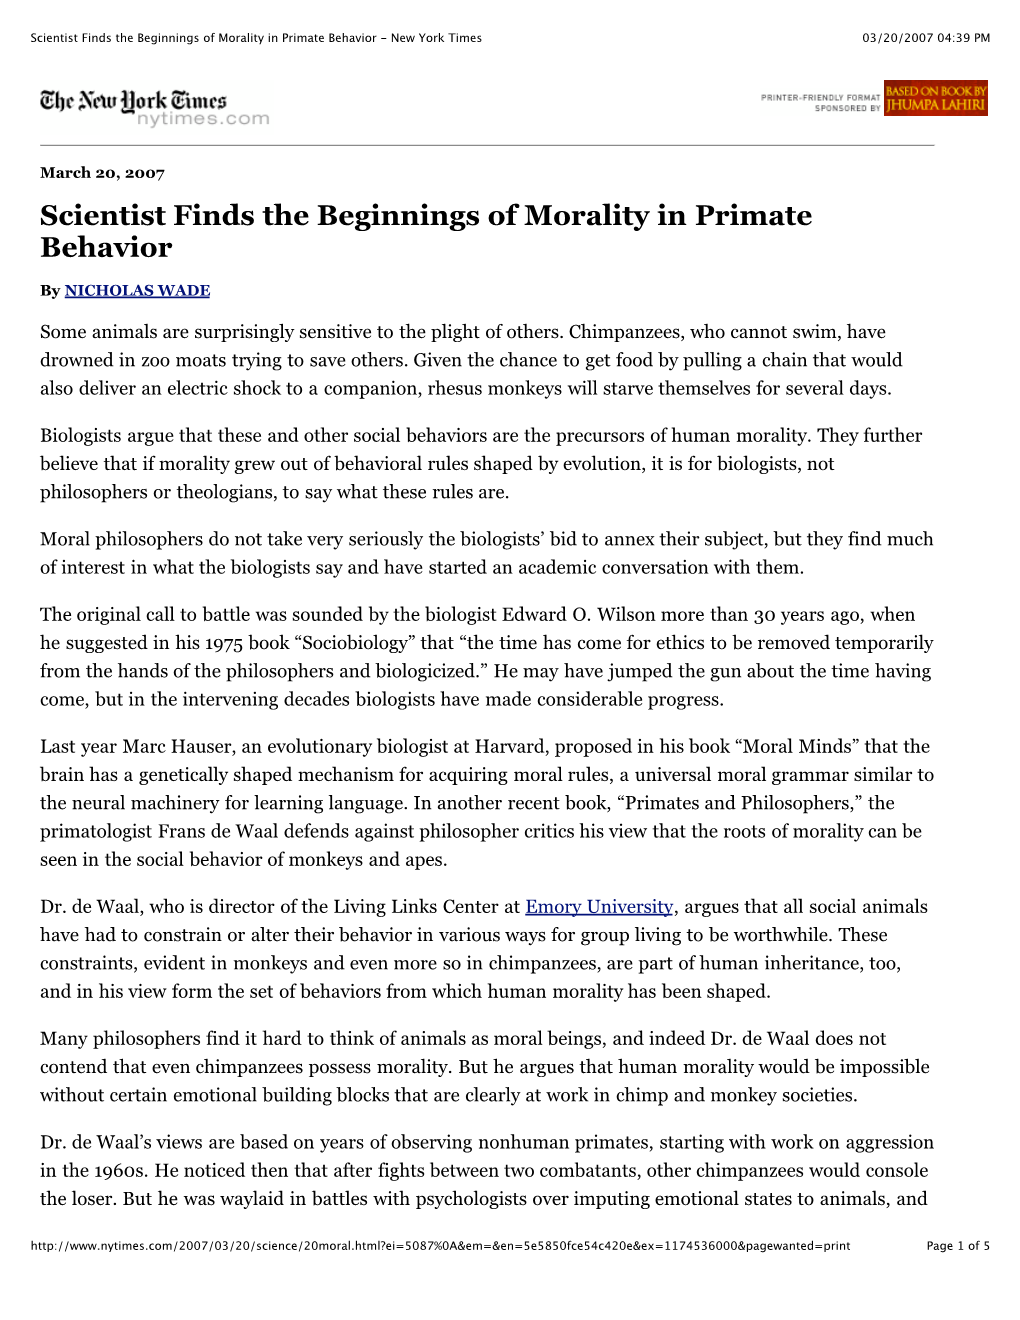 Scientist Finds the Beginnings of Morality in Primate Behavior - New York Times 03/20/2007 04:39 PM